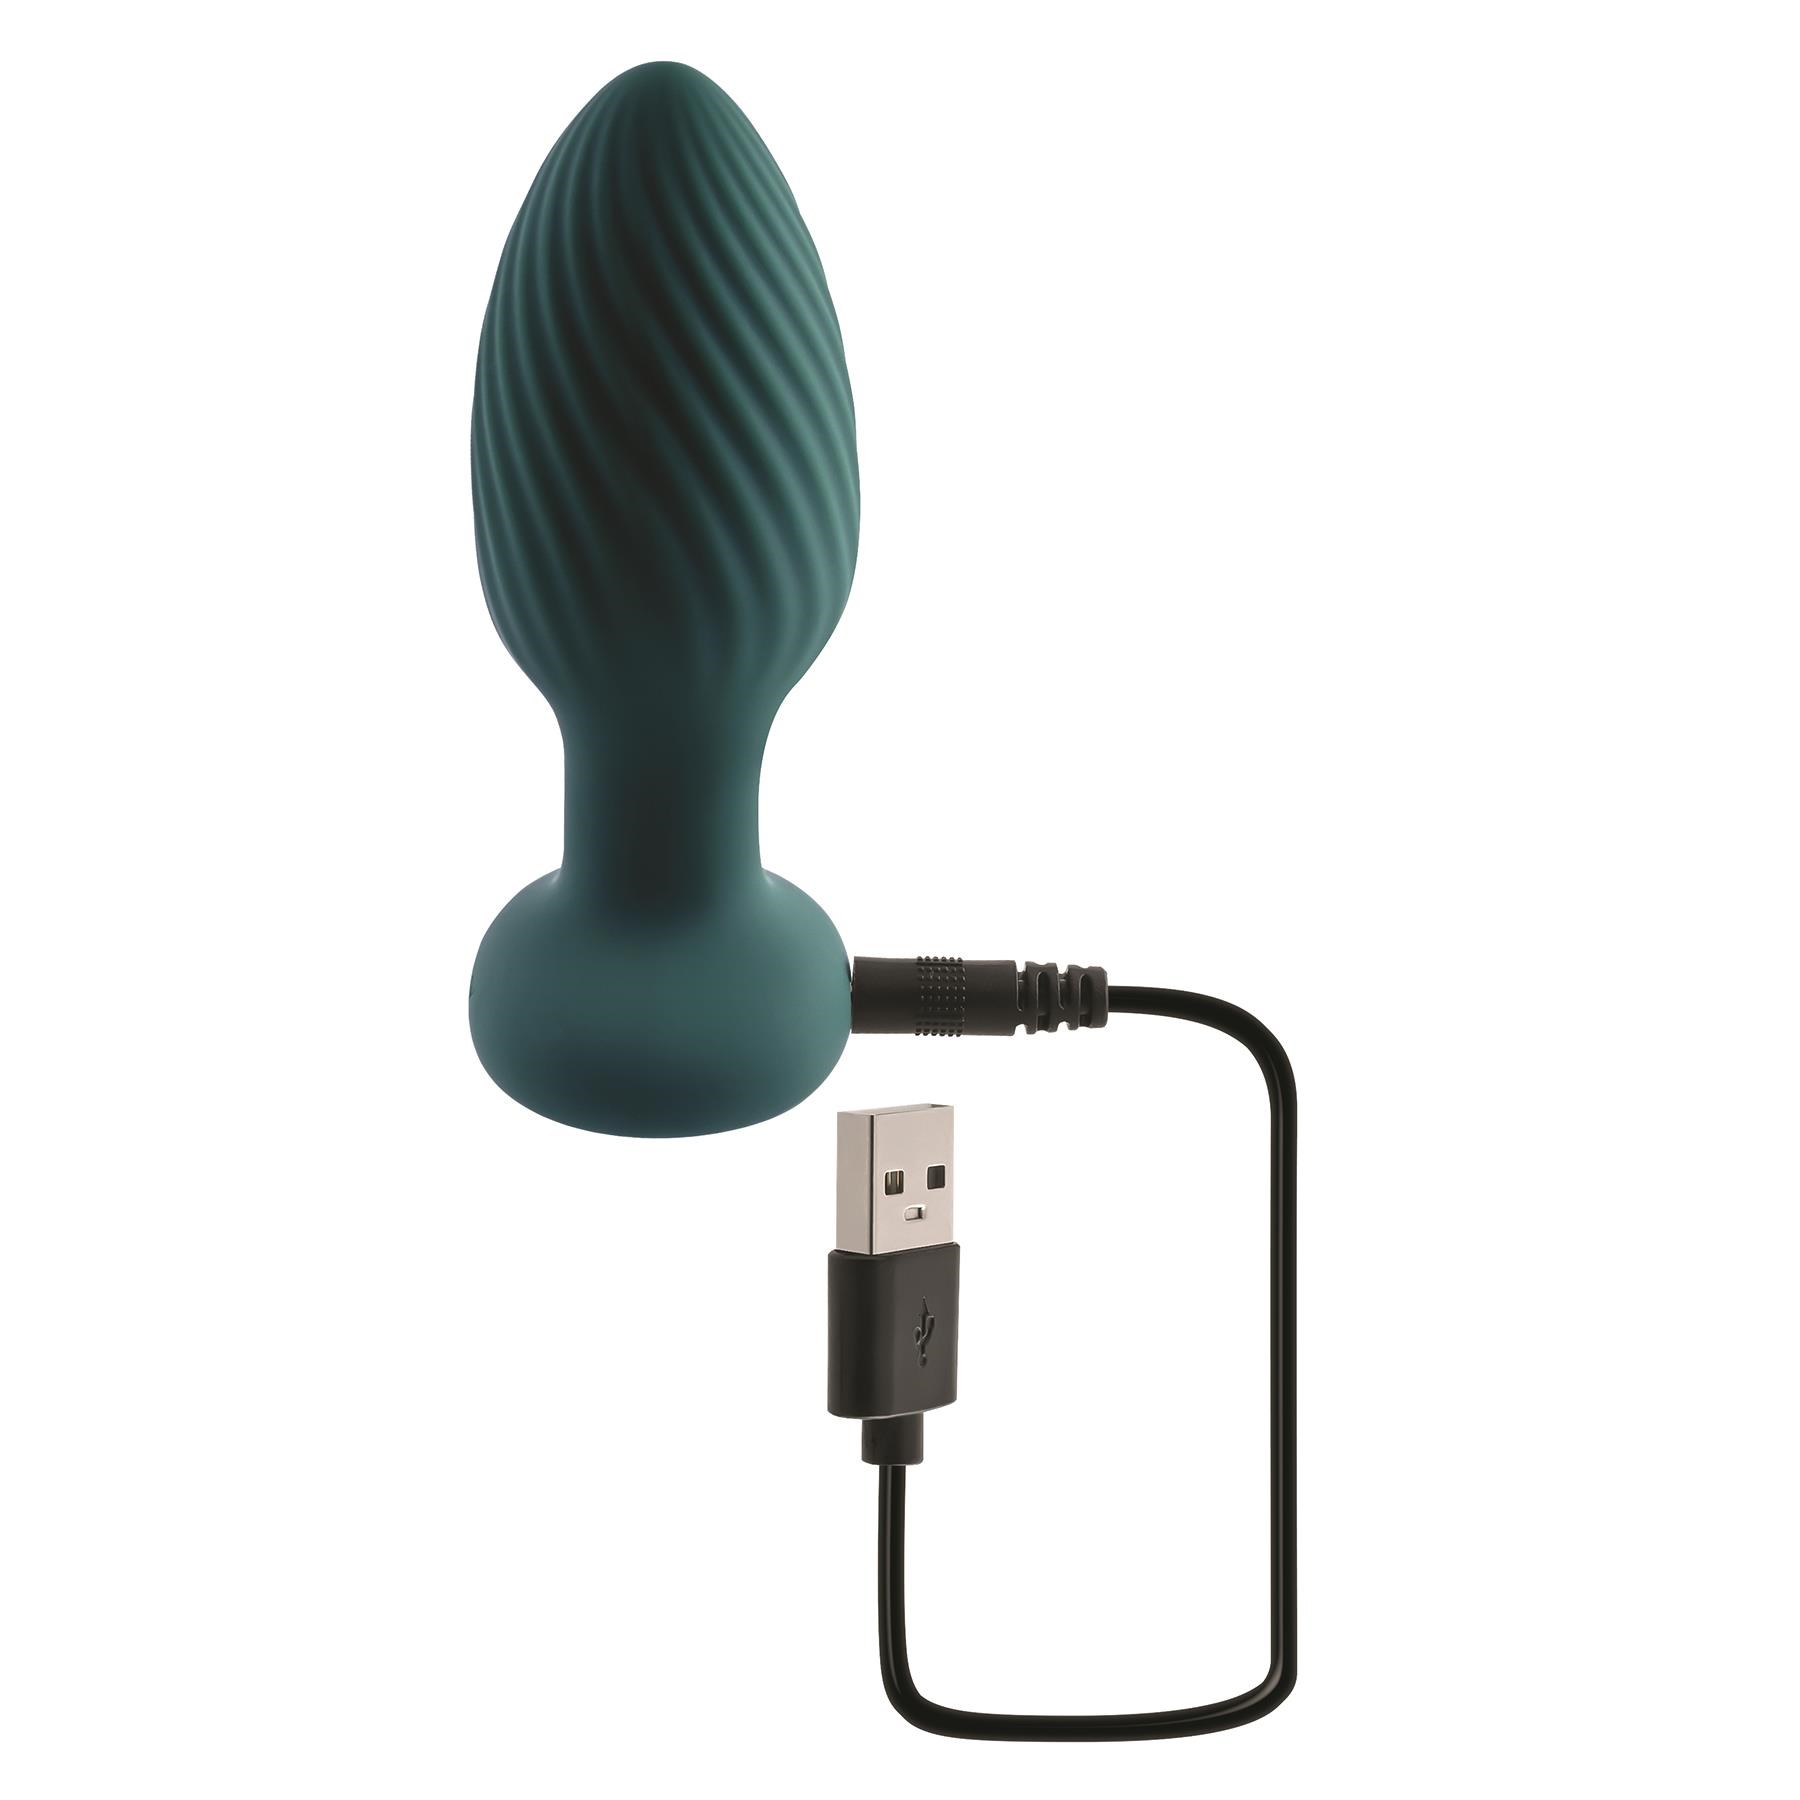 Playboy Pleasure Remote Control Spinning Tail Teaser Butt Plug Showing Where Charging Cable is Place